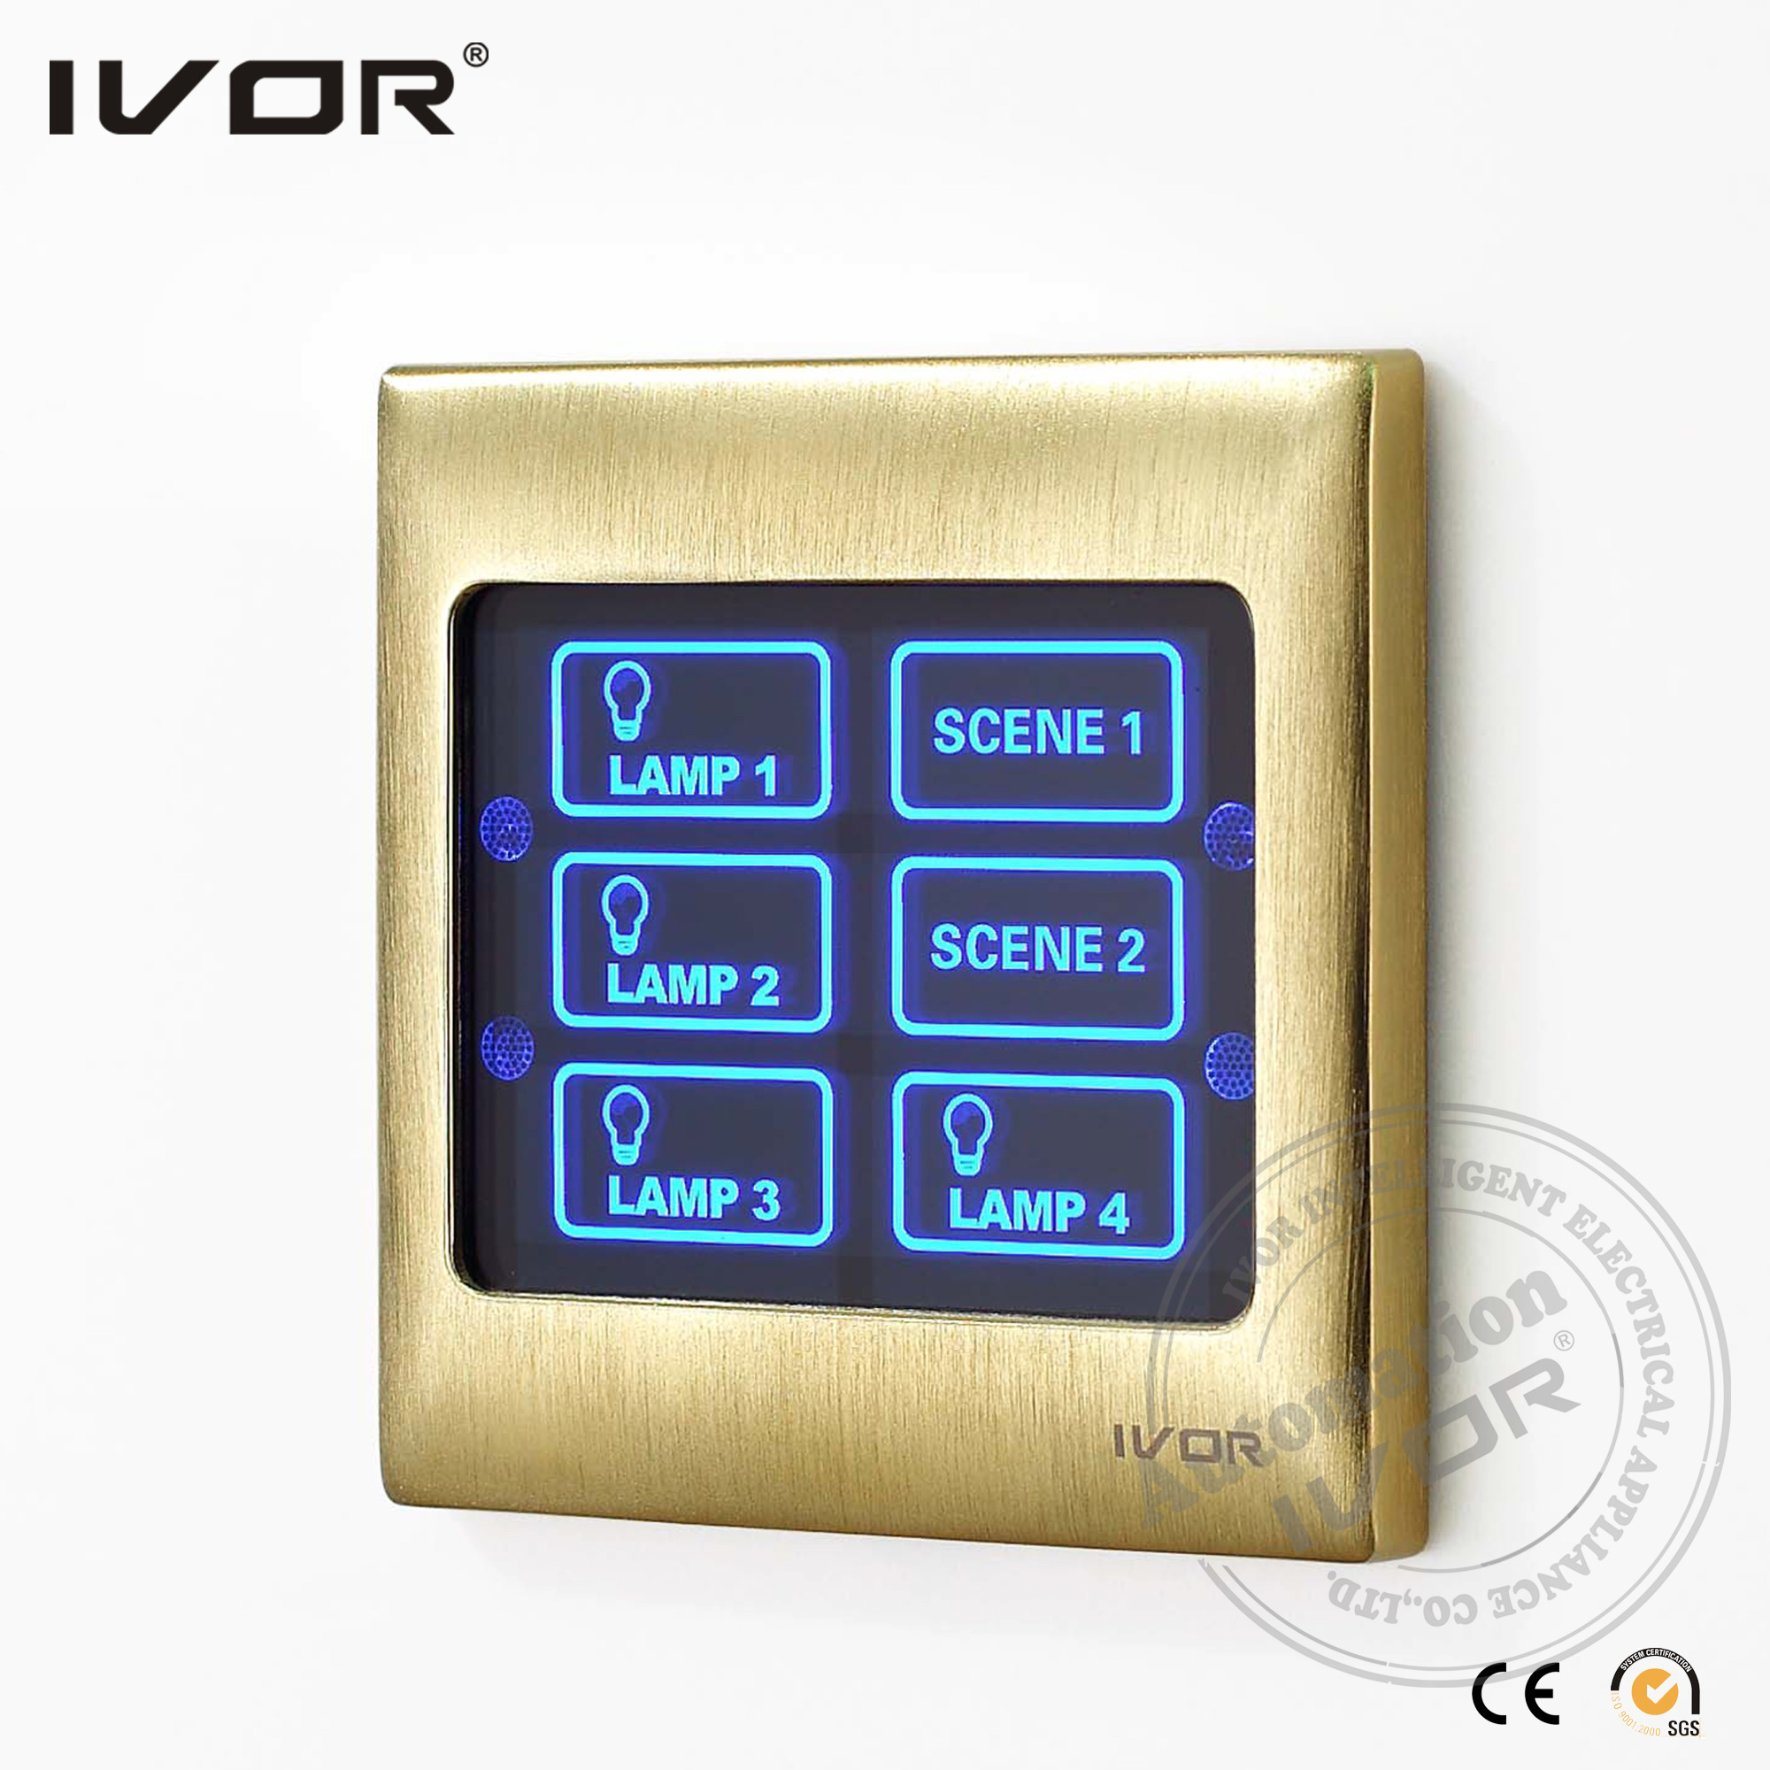 Ivor Smart Home Light Switch with Scene and Remote Control